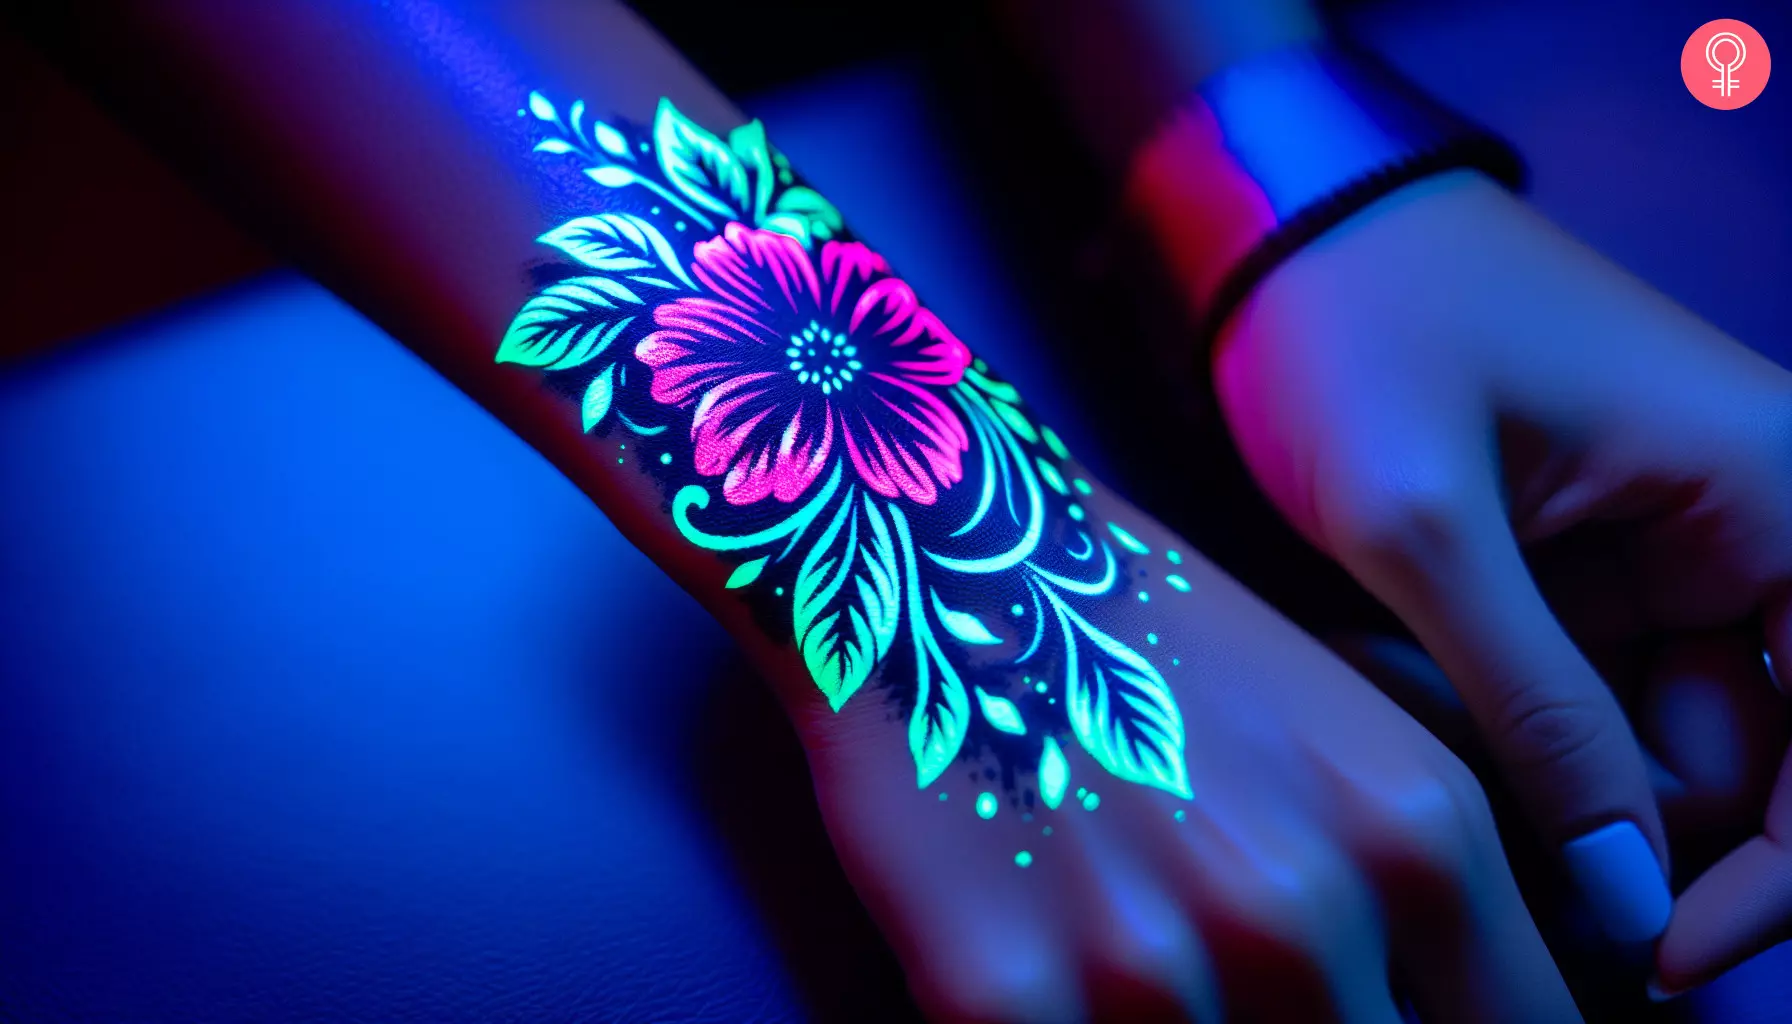 A stunning floral UV tattoo on the hand of a woman